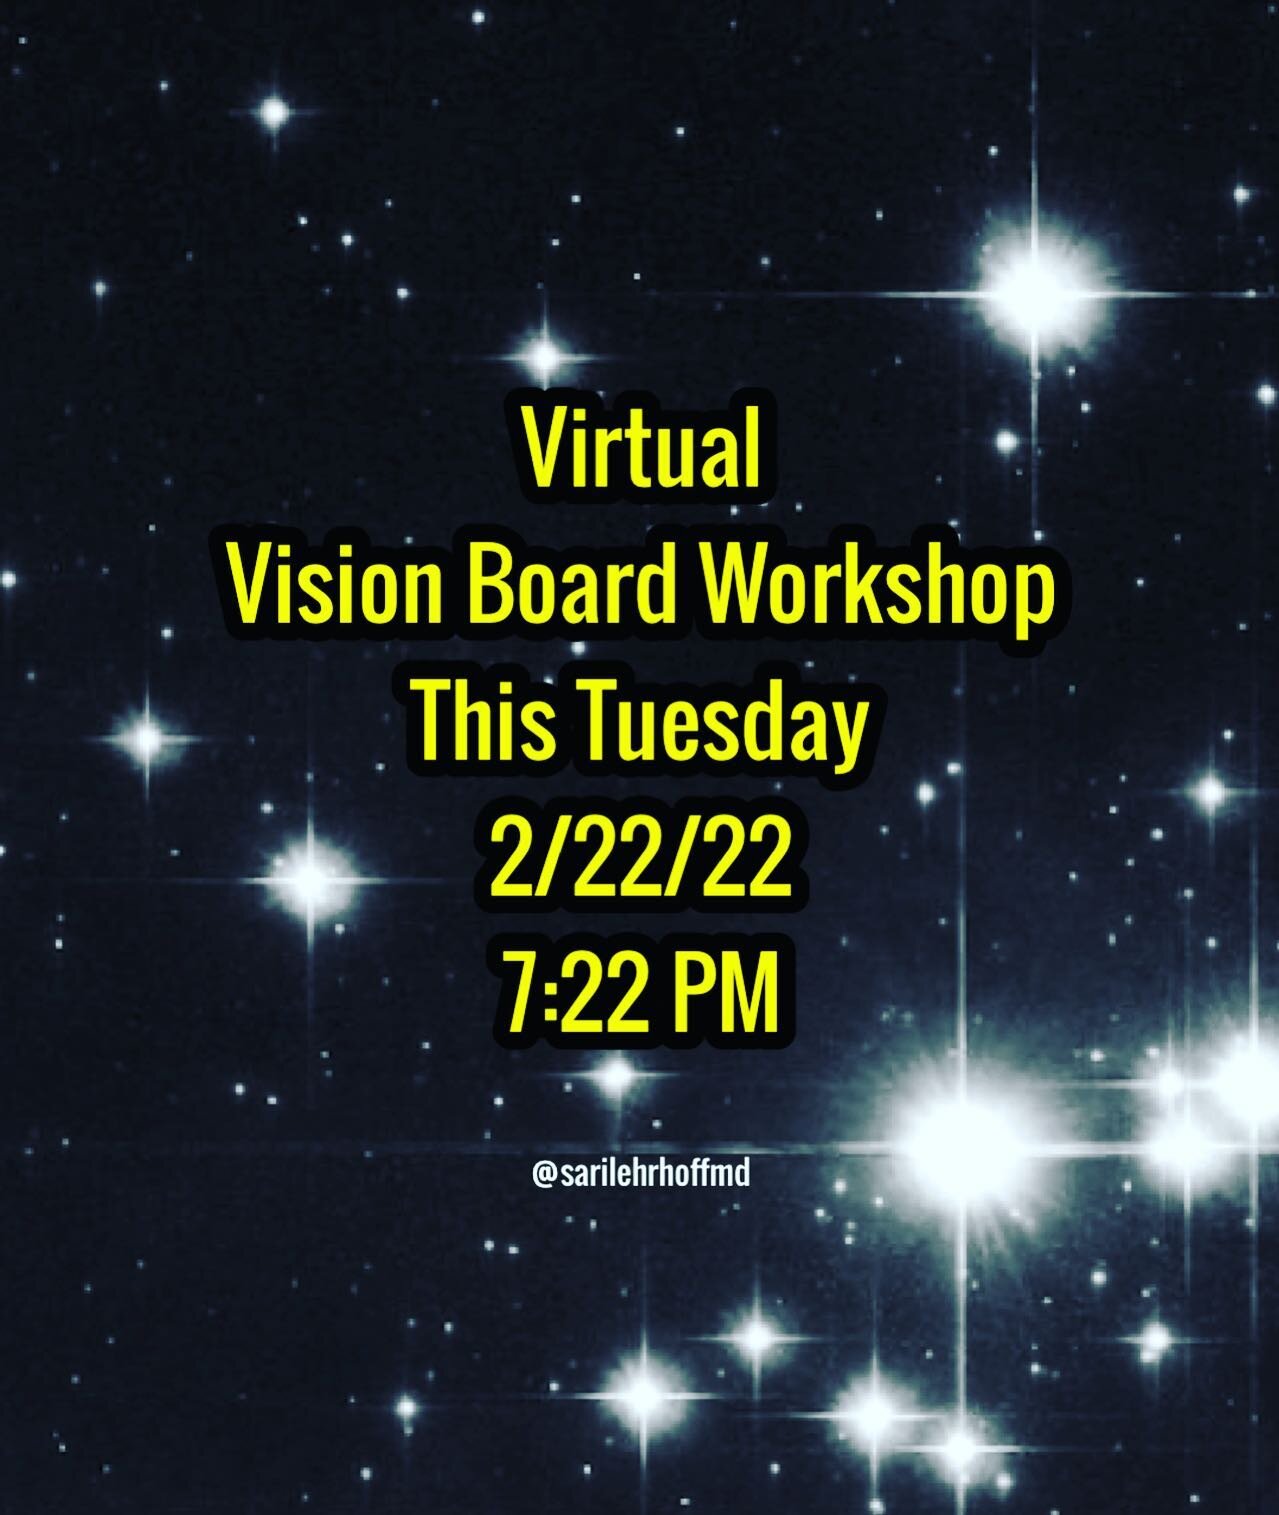 What? Vision Board Workshop
Manifesting that which we desire to be and attract to us over the next year!
When? 2/22/22 at 7:22 PM
Where? Zoom. Link sent day of.
How? Register by contacting office: evolvewellnessnj@gmail.com or text: 732-997-7385
Just